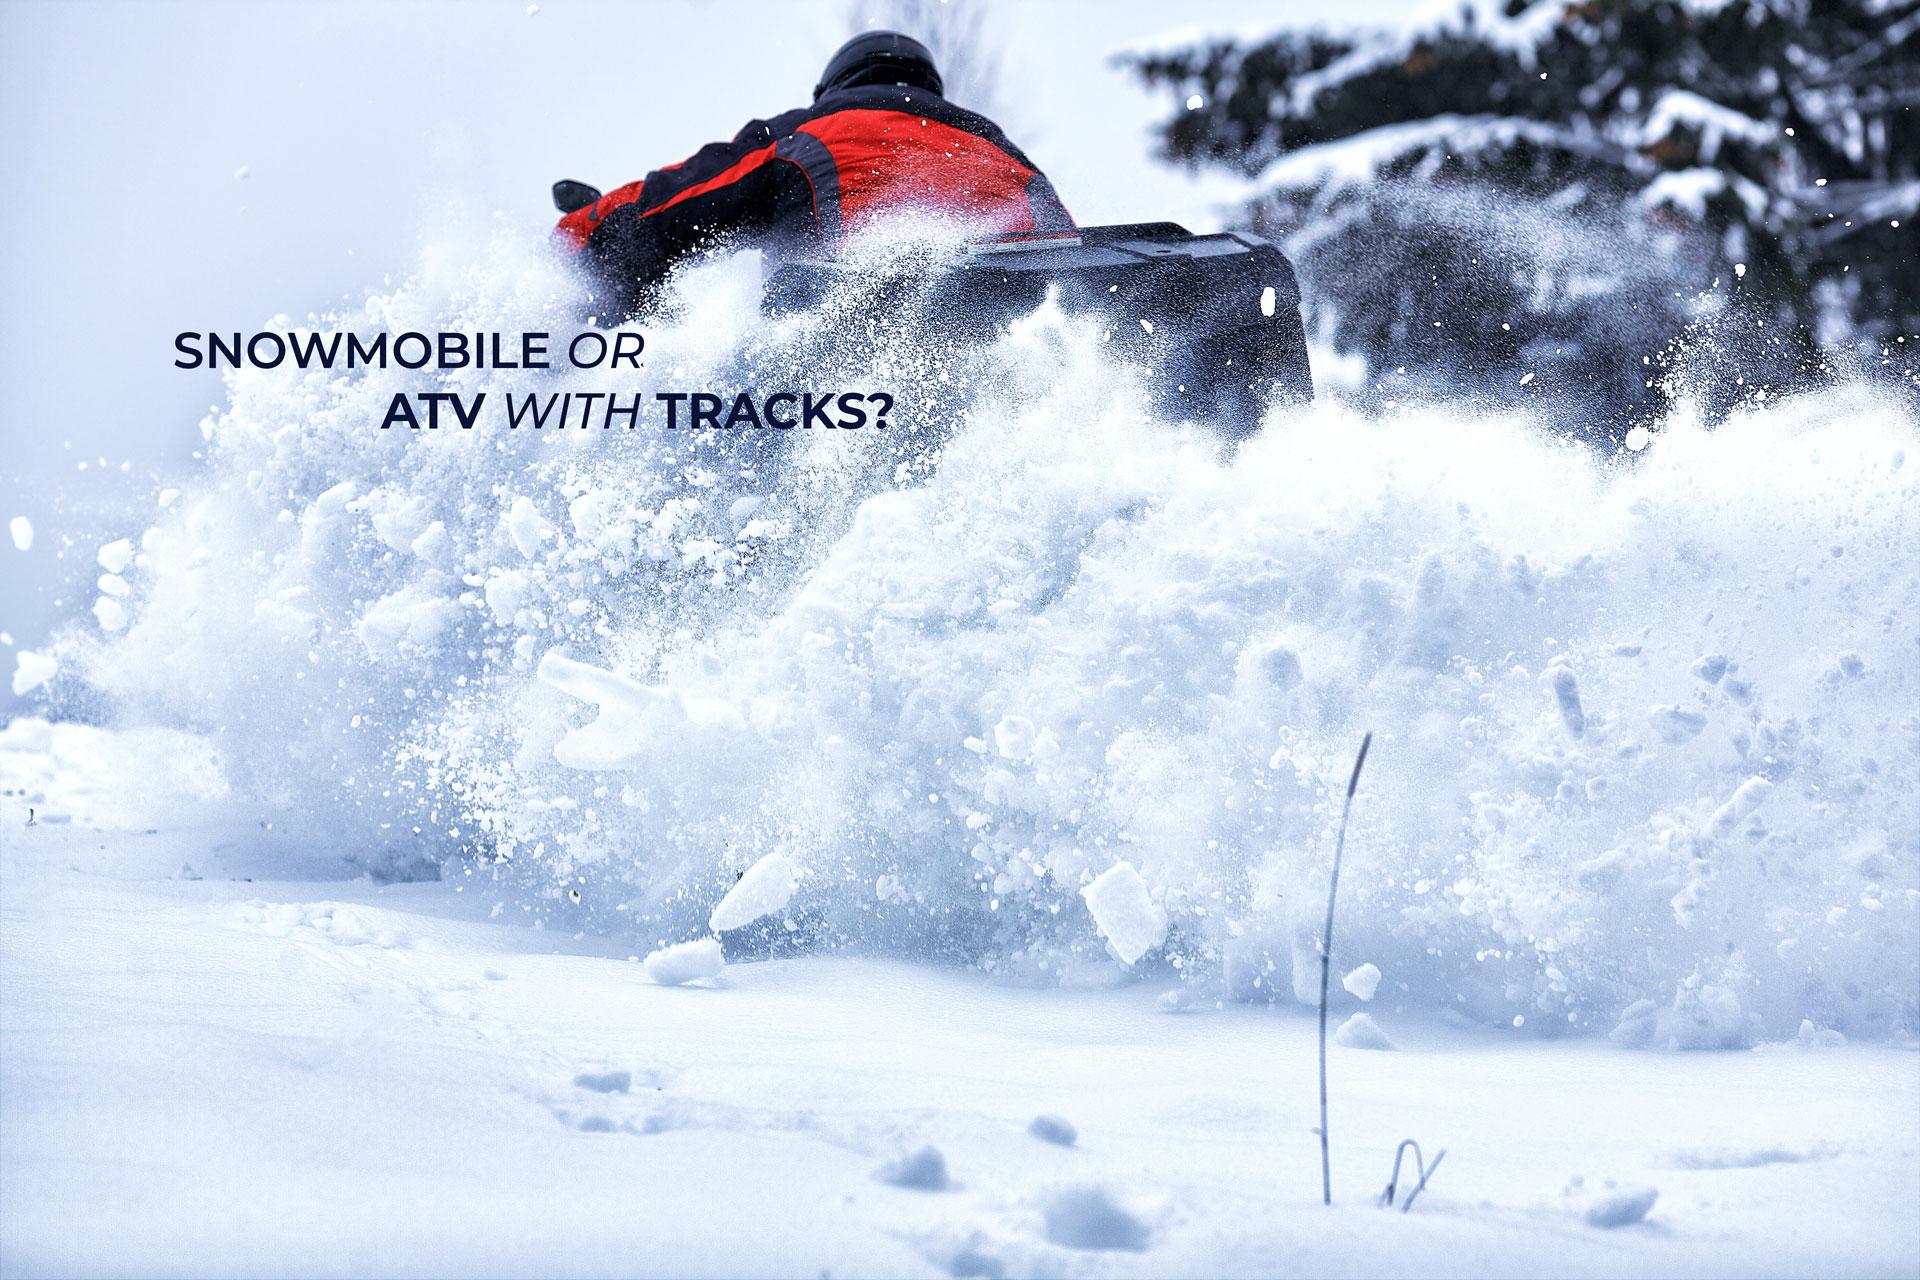 Snowmobile or ATV with Tracks?